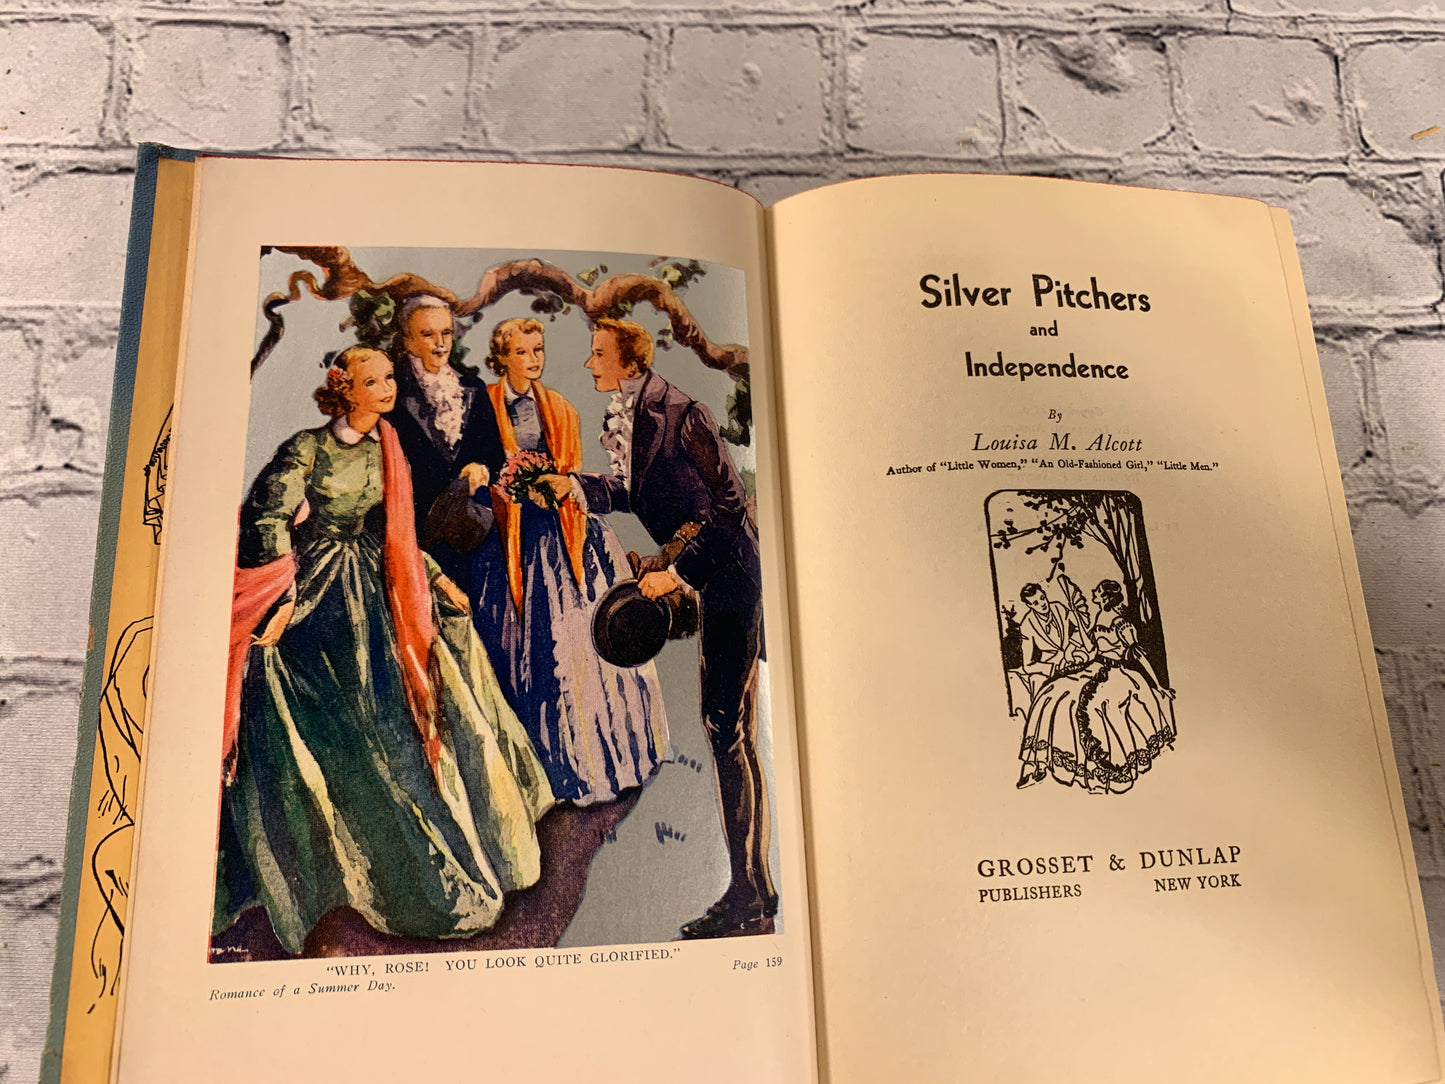 Silver Pitchers and Independence by Louisa M. Alcott [1908]